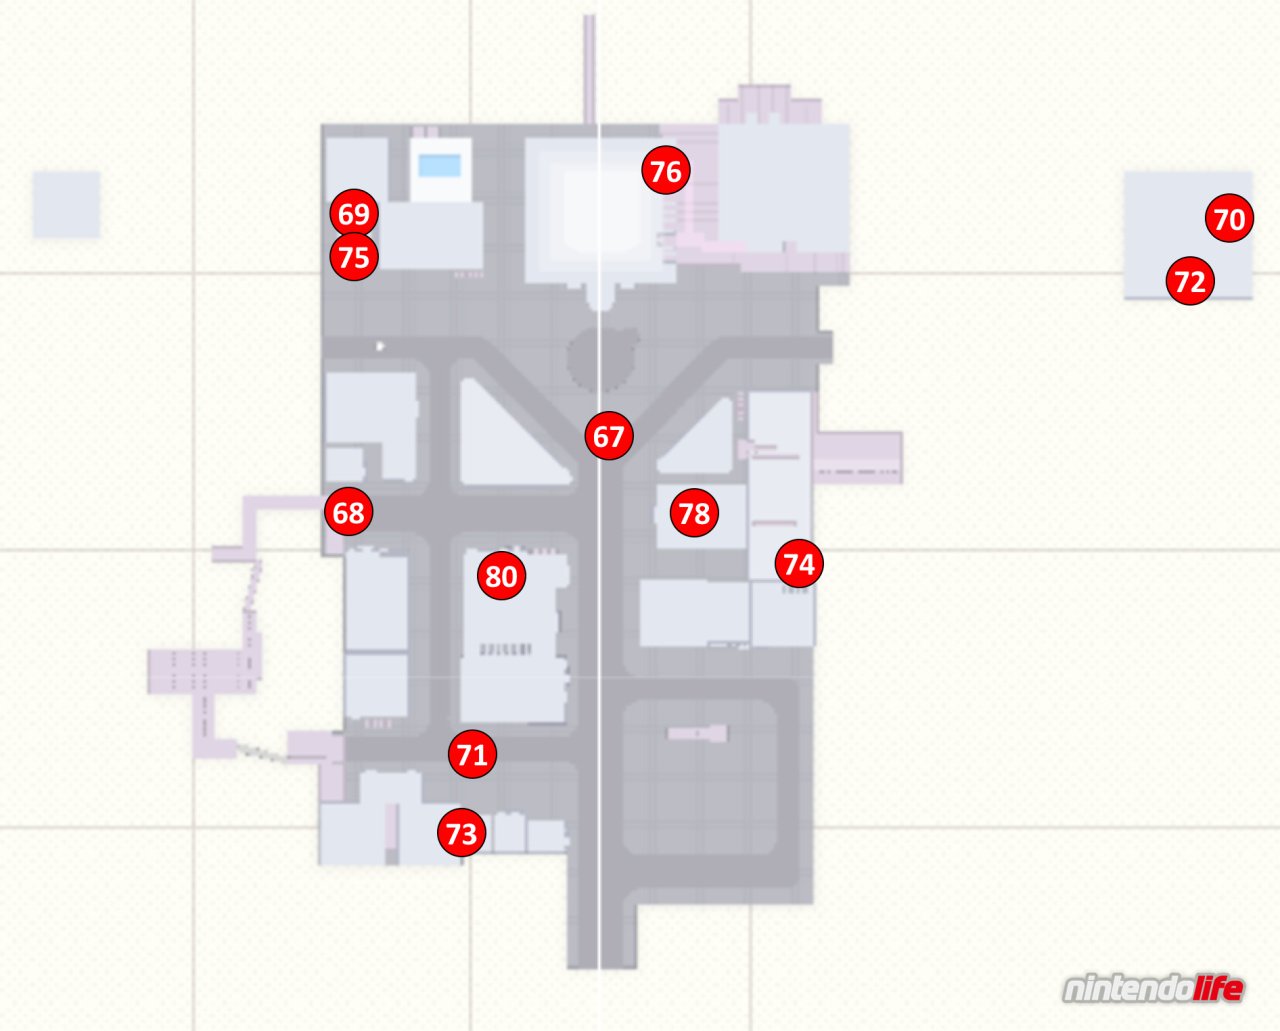 All The Metro Kingdom Power Moons' Locations In Super Mario Odyssey